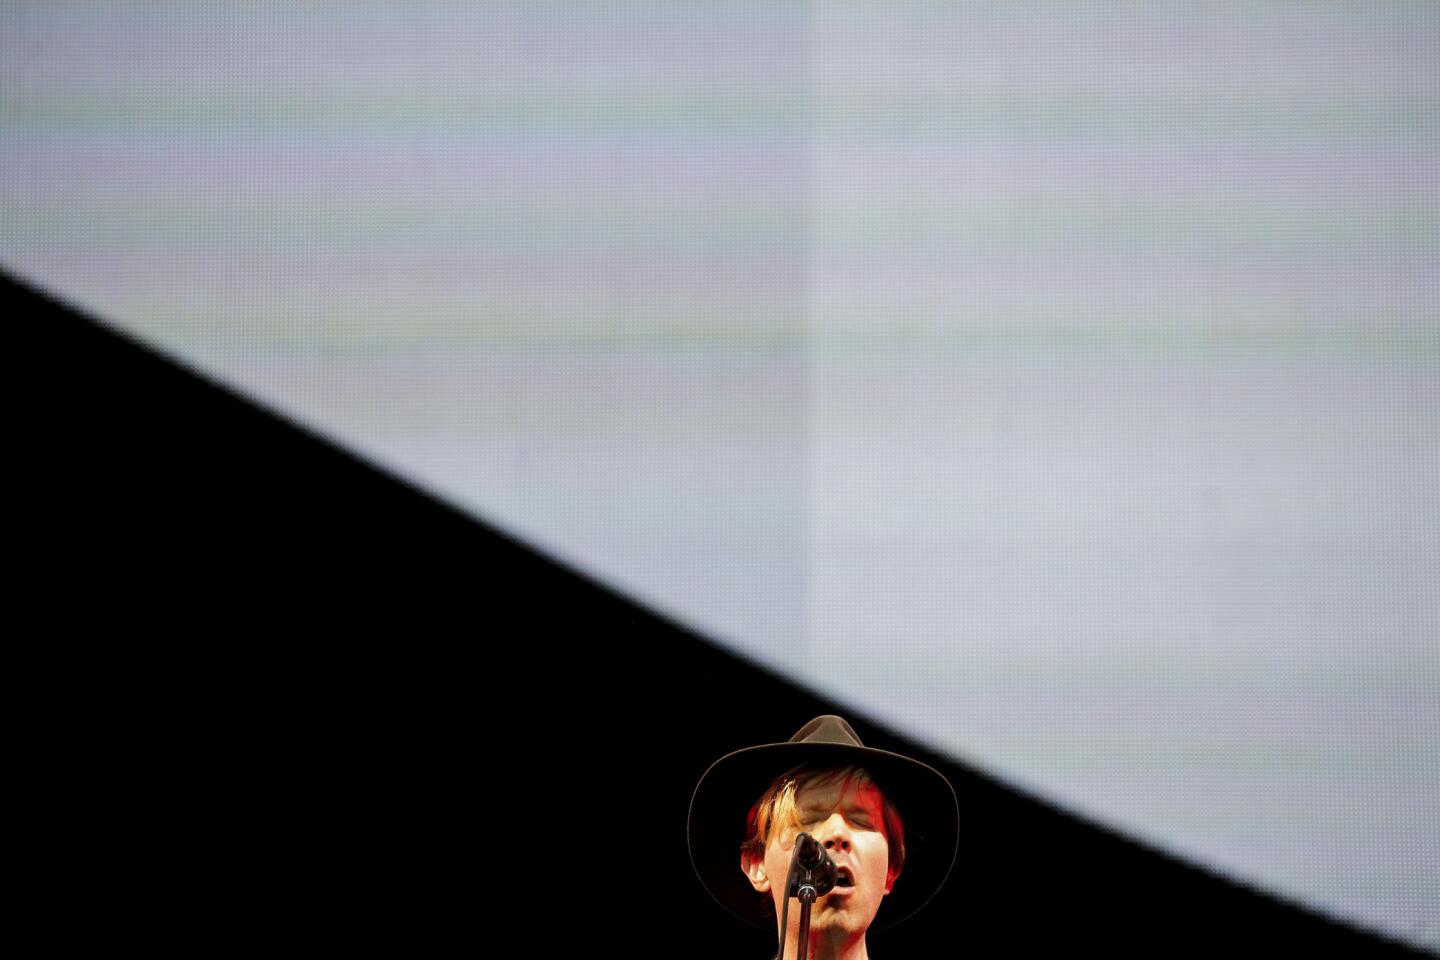 Beck performs on the final day of the second weekend of the Coachella Valley Music and Arts Festival.